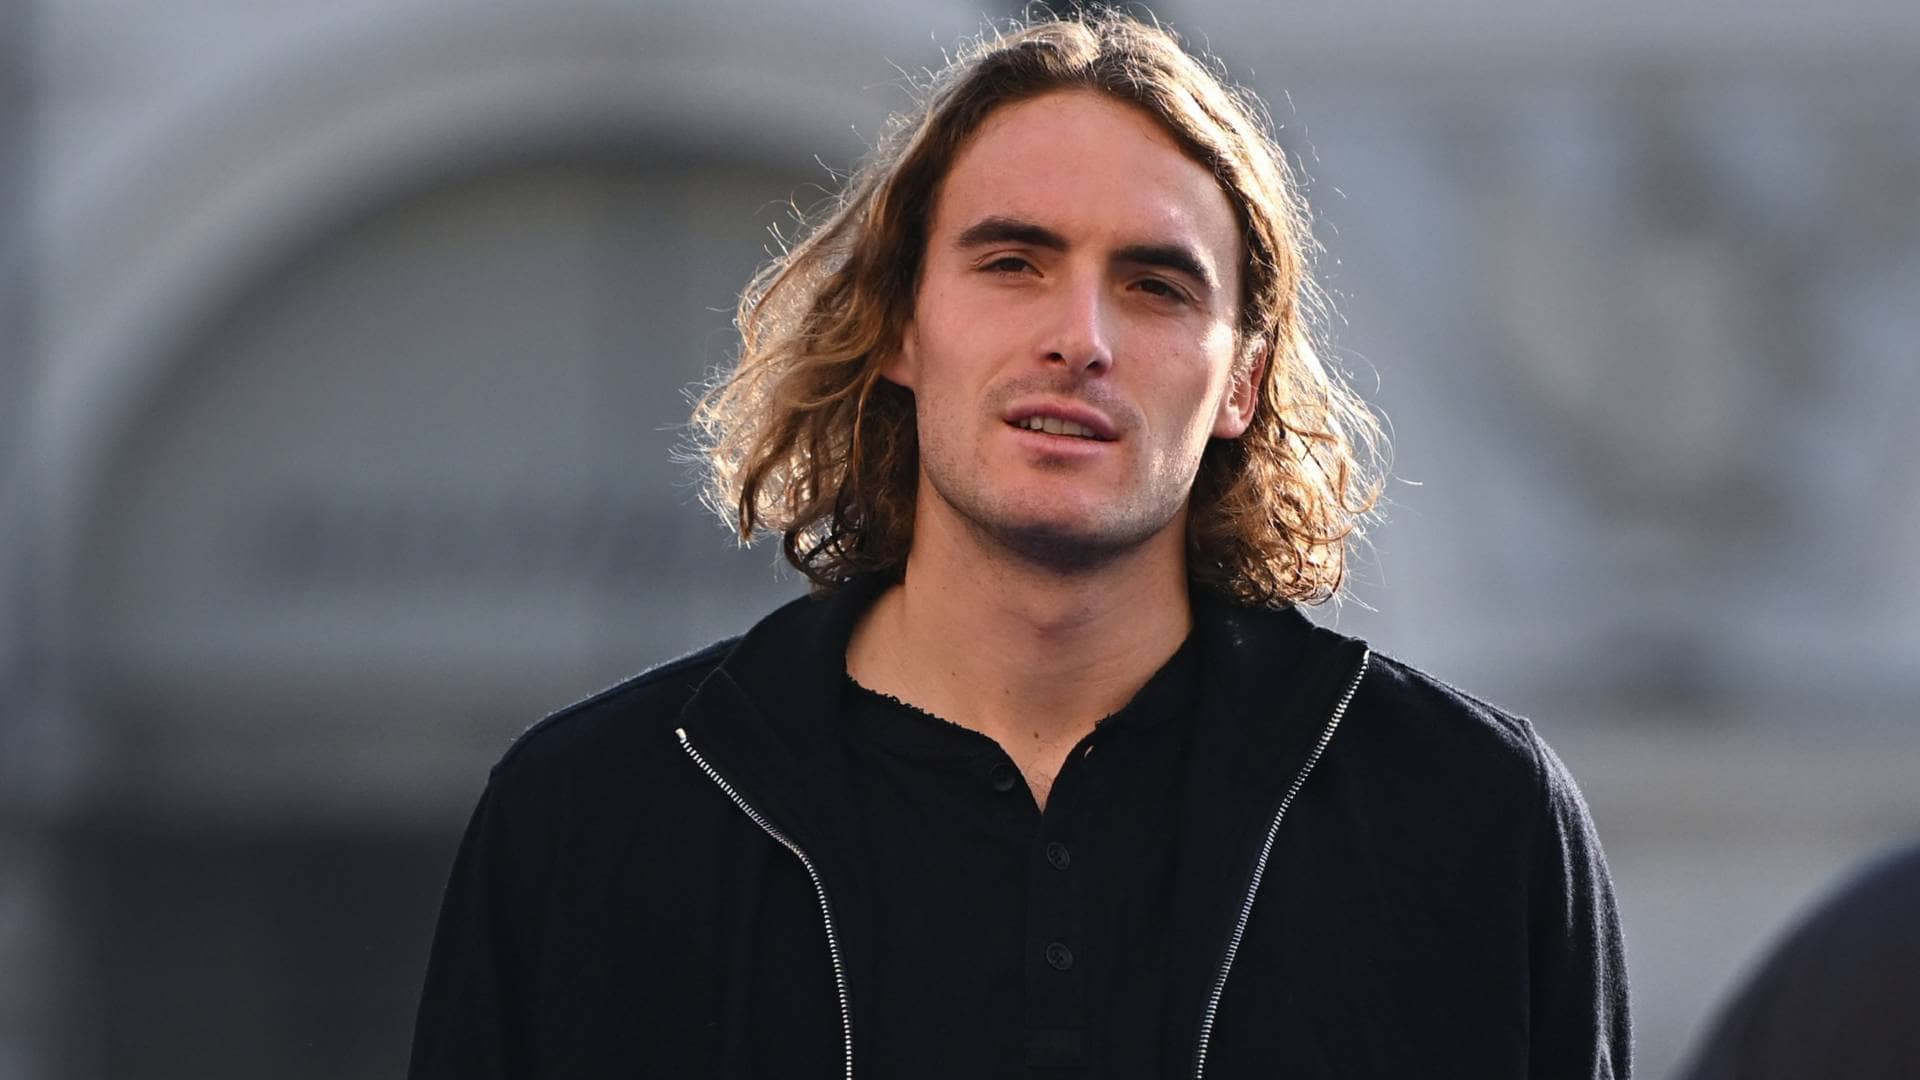 Stefanos Tsisipas returns to the Nitto ATP Finals in Turin for the second time.